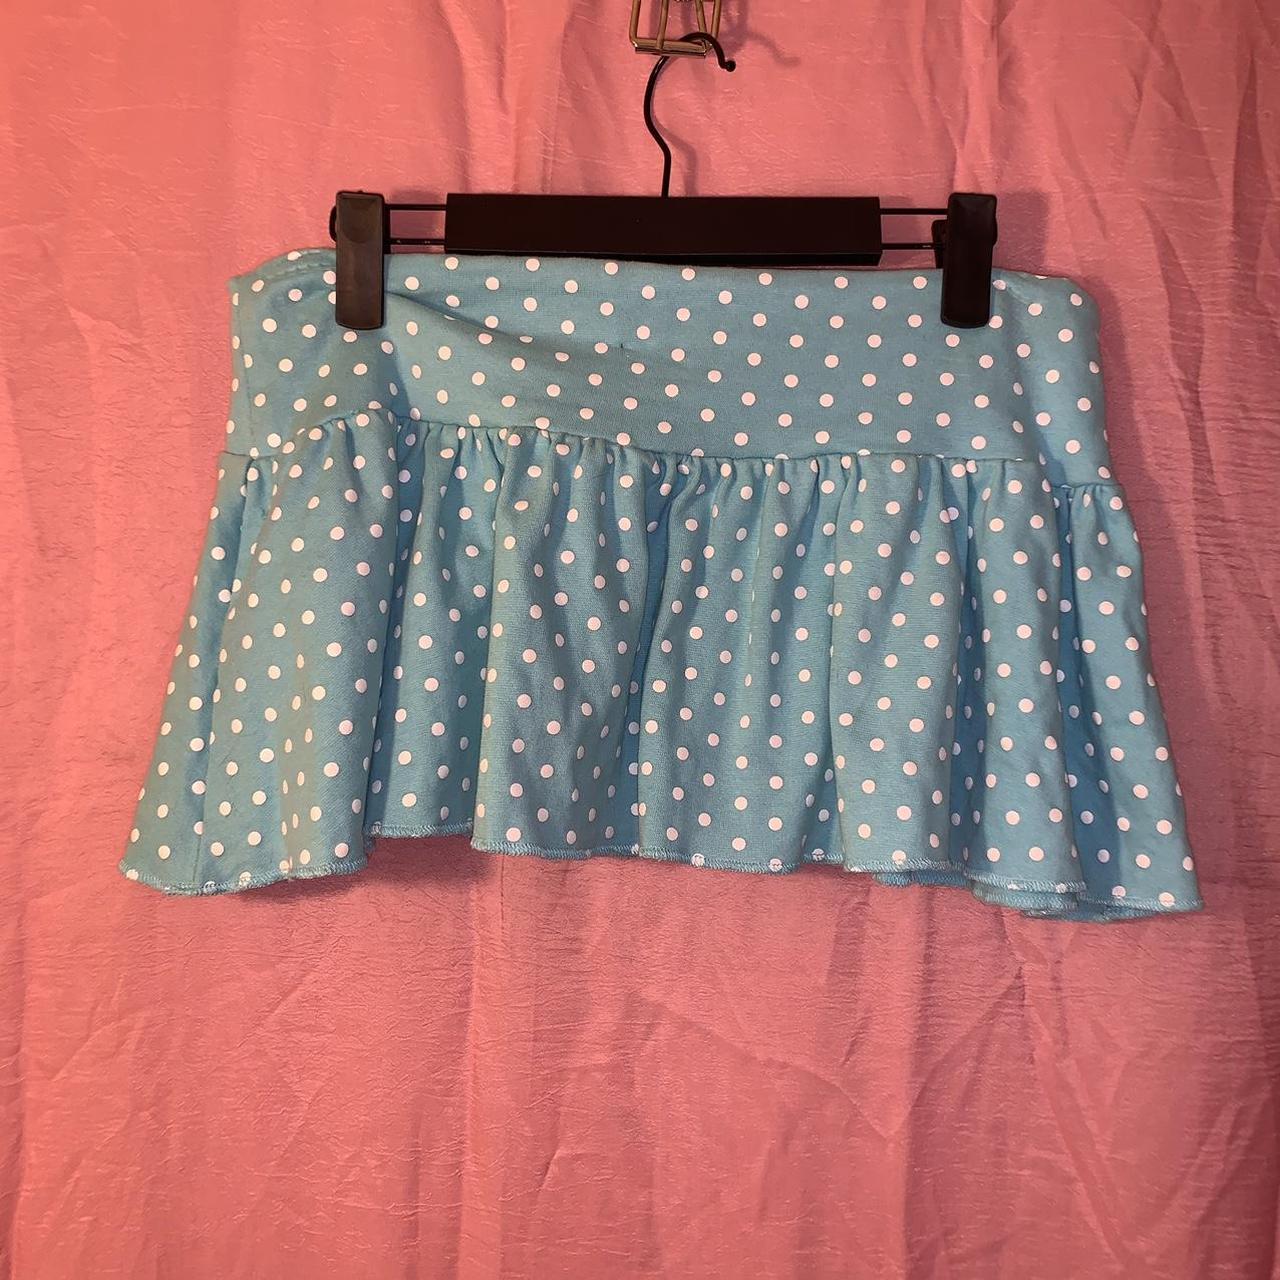 Women’s Blue and White Cotton Skirt